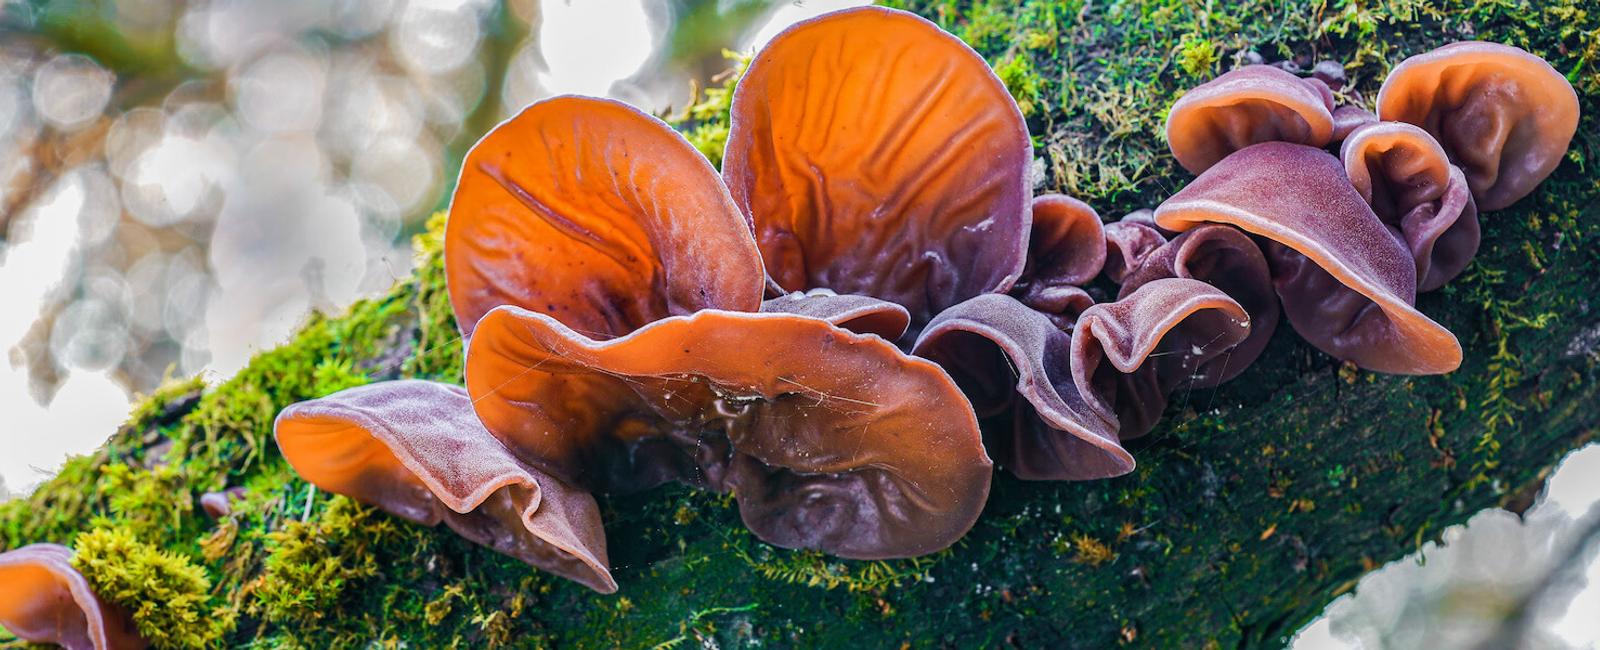 The Complete Guide to Wood Ear Mushrooms